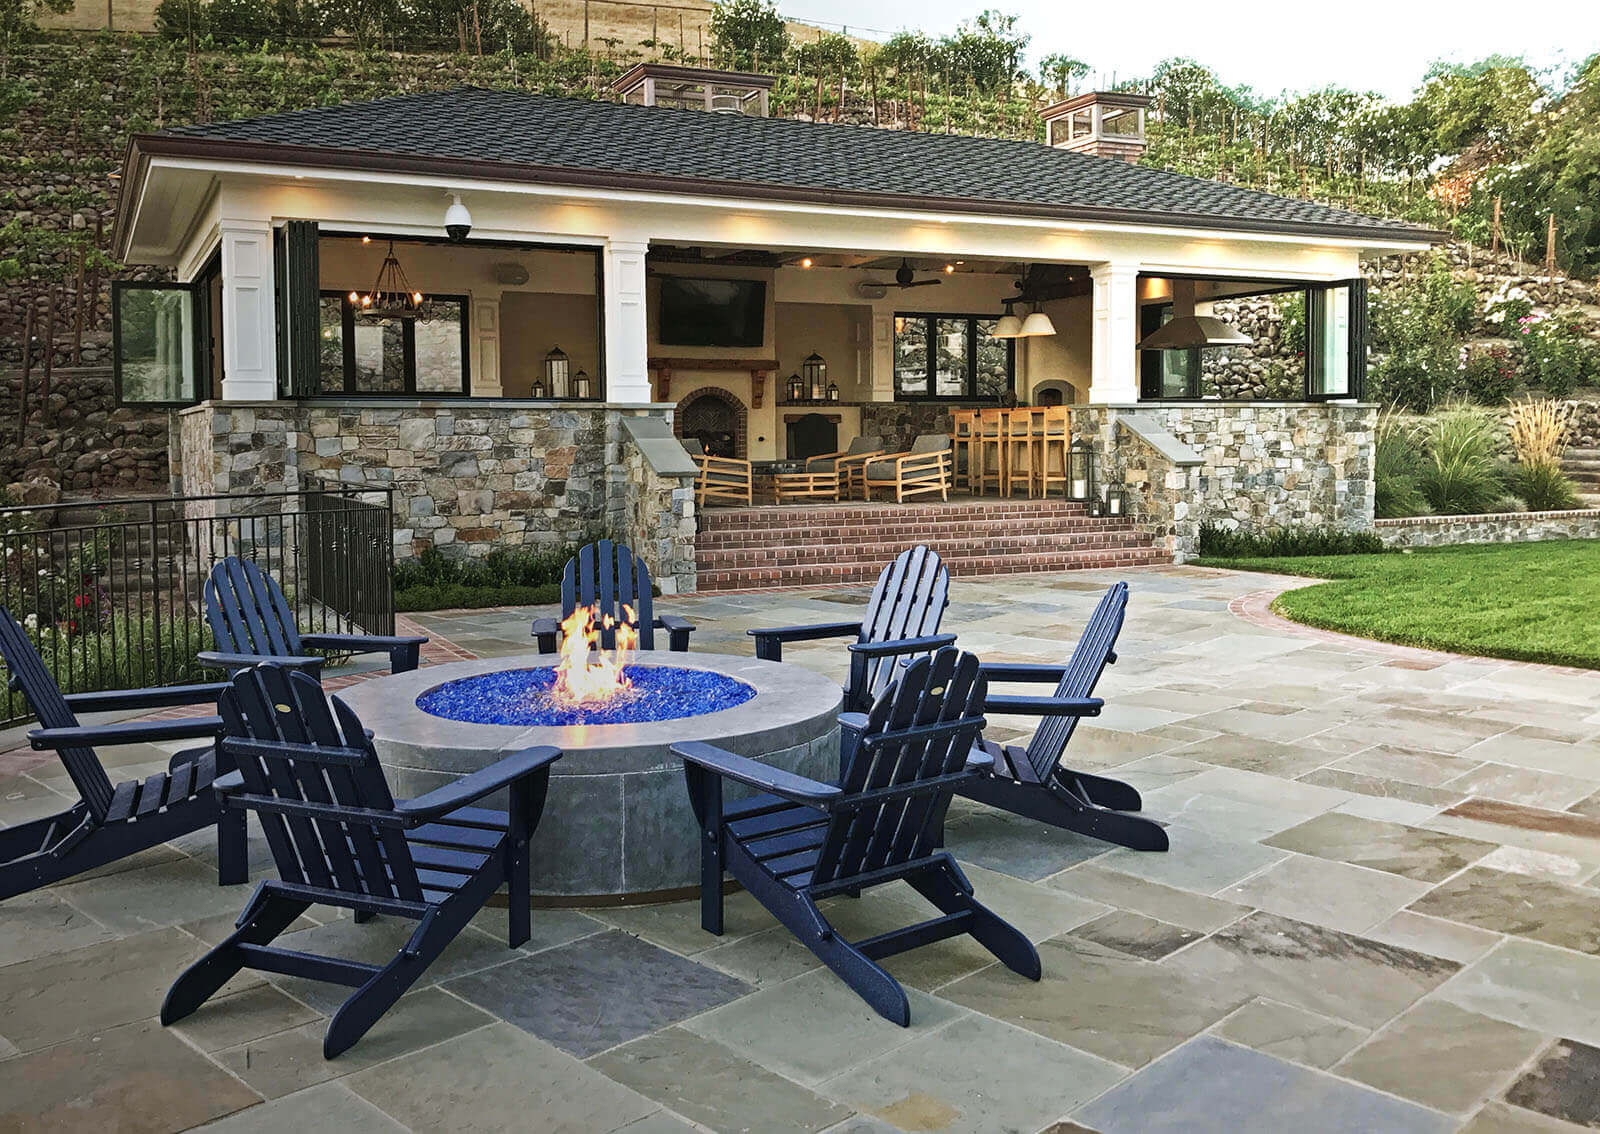 Transitional concrete and stone fire pit with blue crushed glass and Adirondack chairs on stone patio with cabana behind.